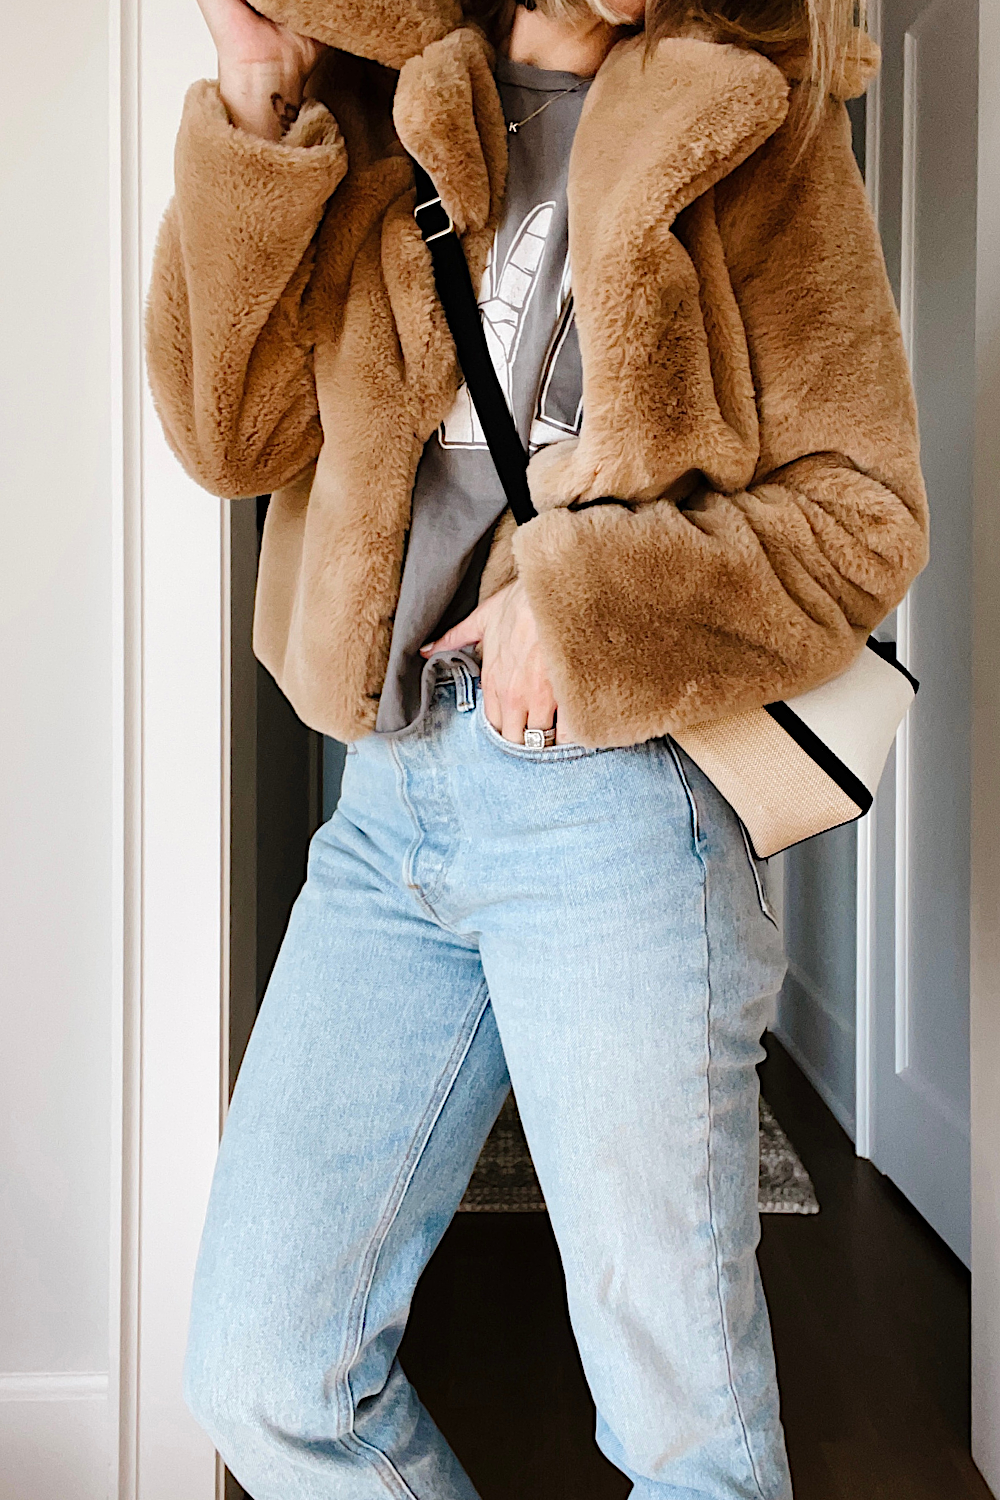 Suzanne wearing a faux fur jacket, pullover, denim jeans, and crossbody bag